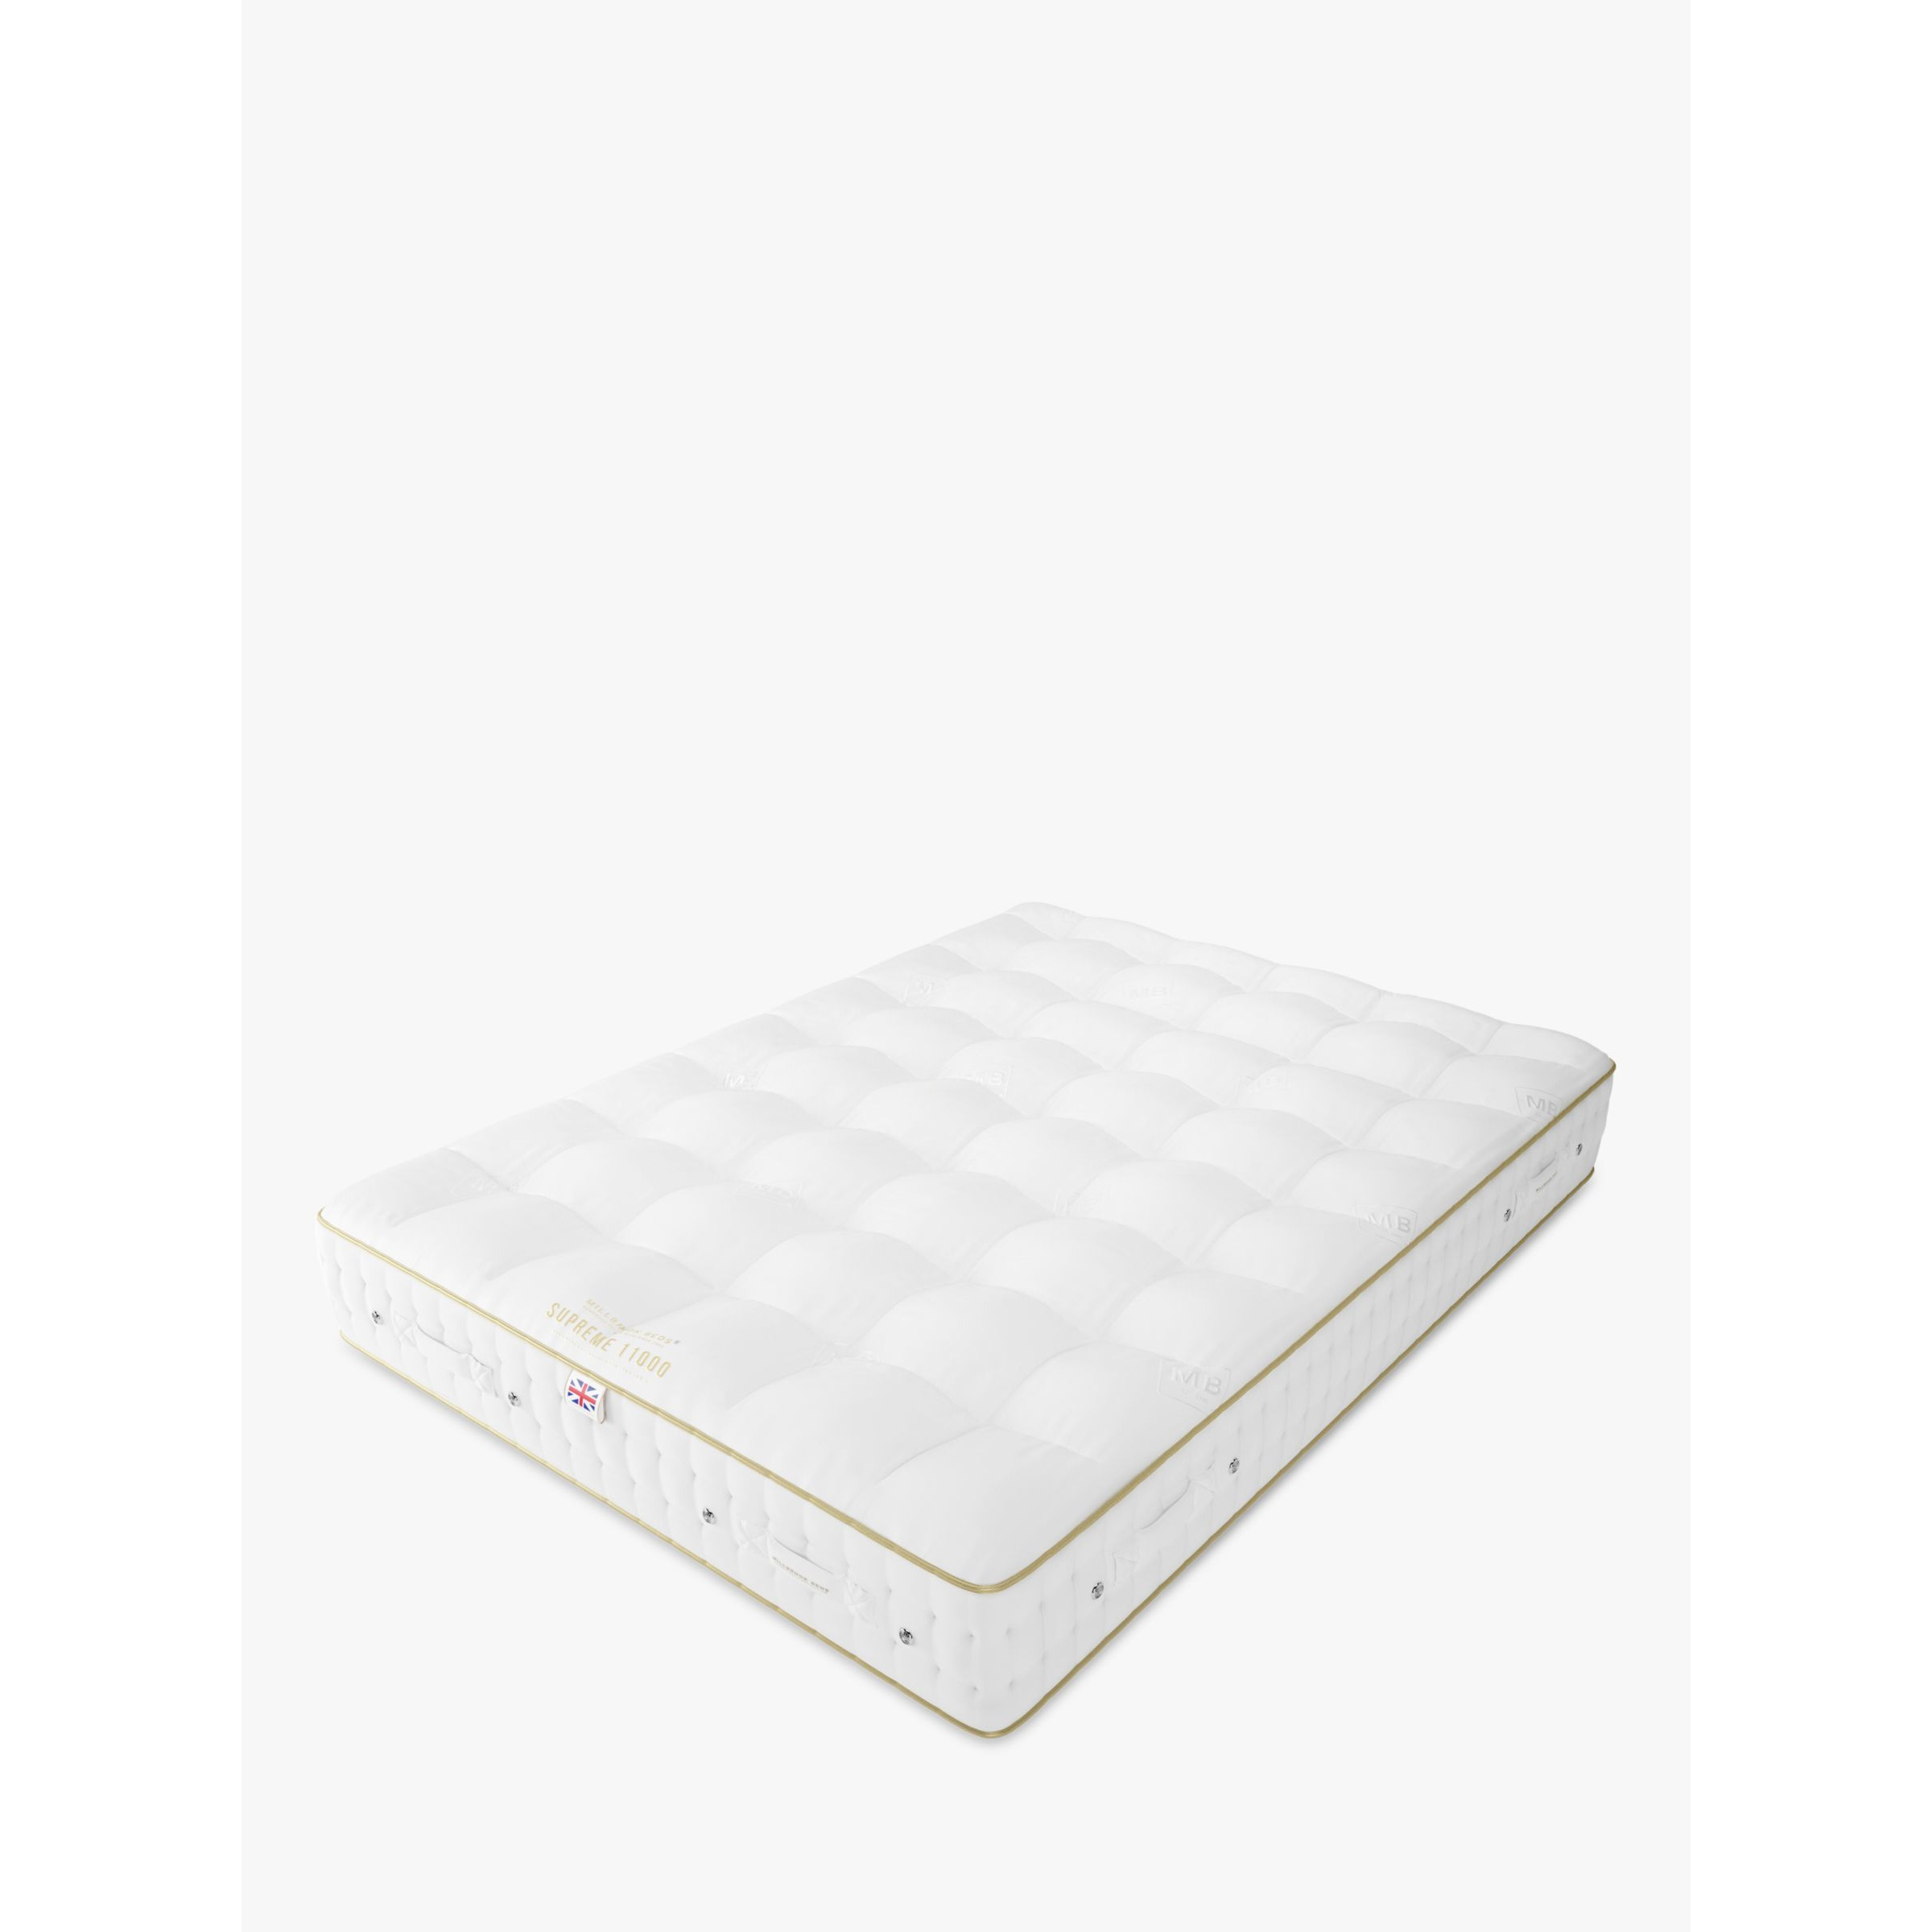 Millbrook Beds Supreme Collection 11000 Mattress, Firm Tension, Single - image 1